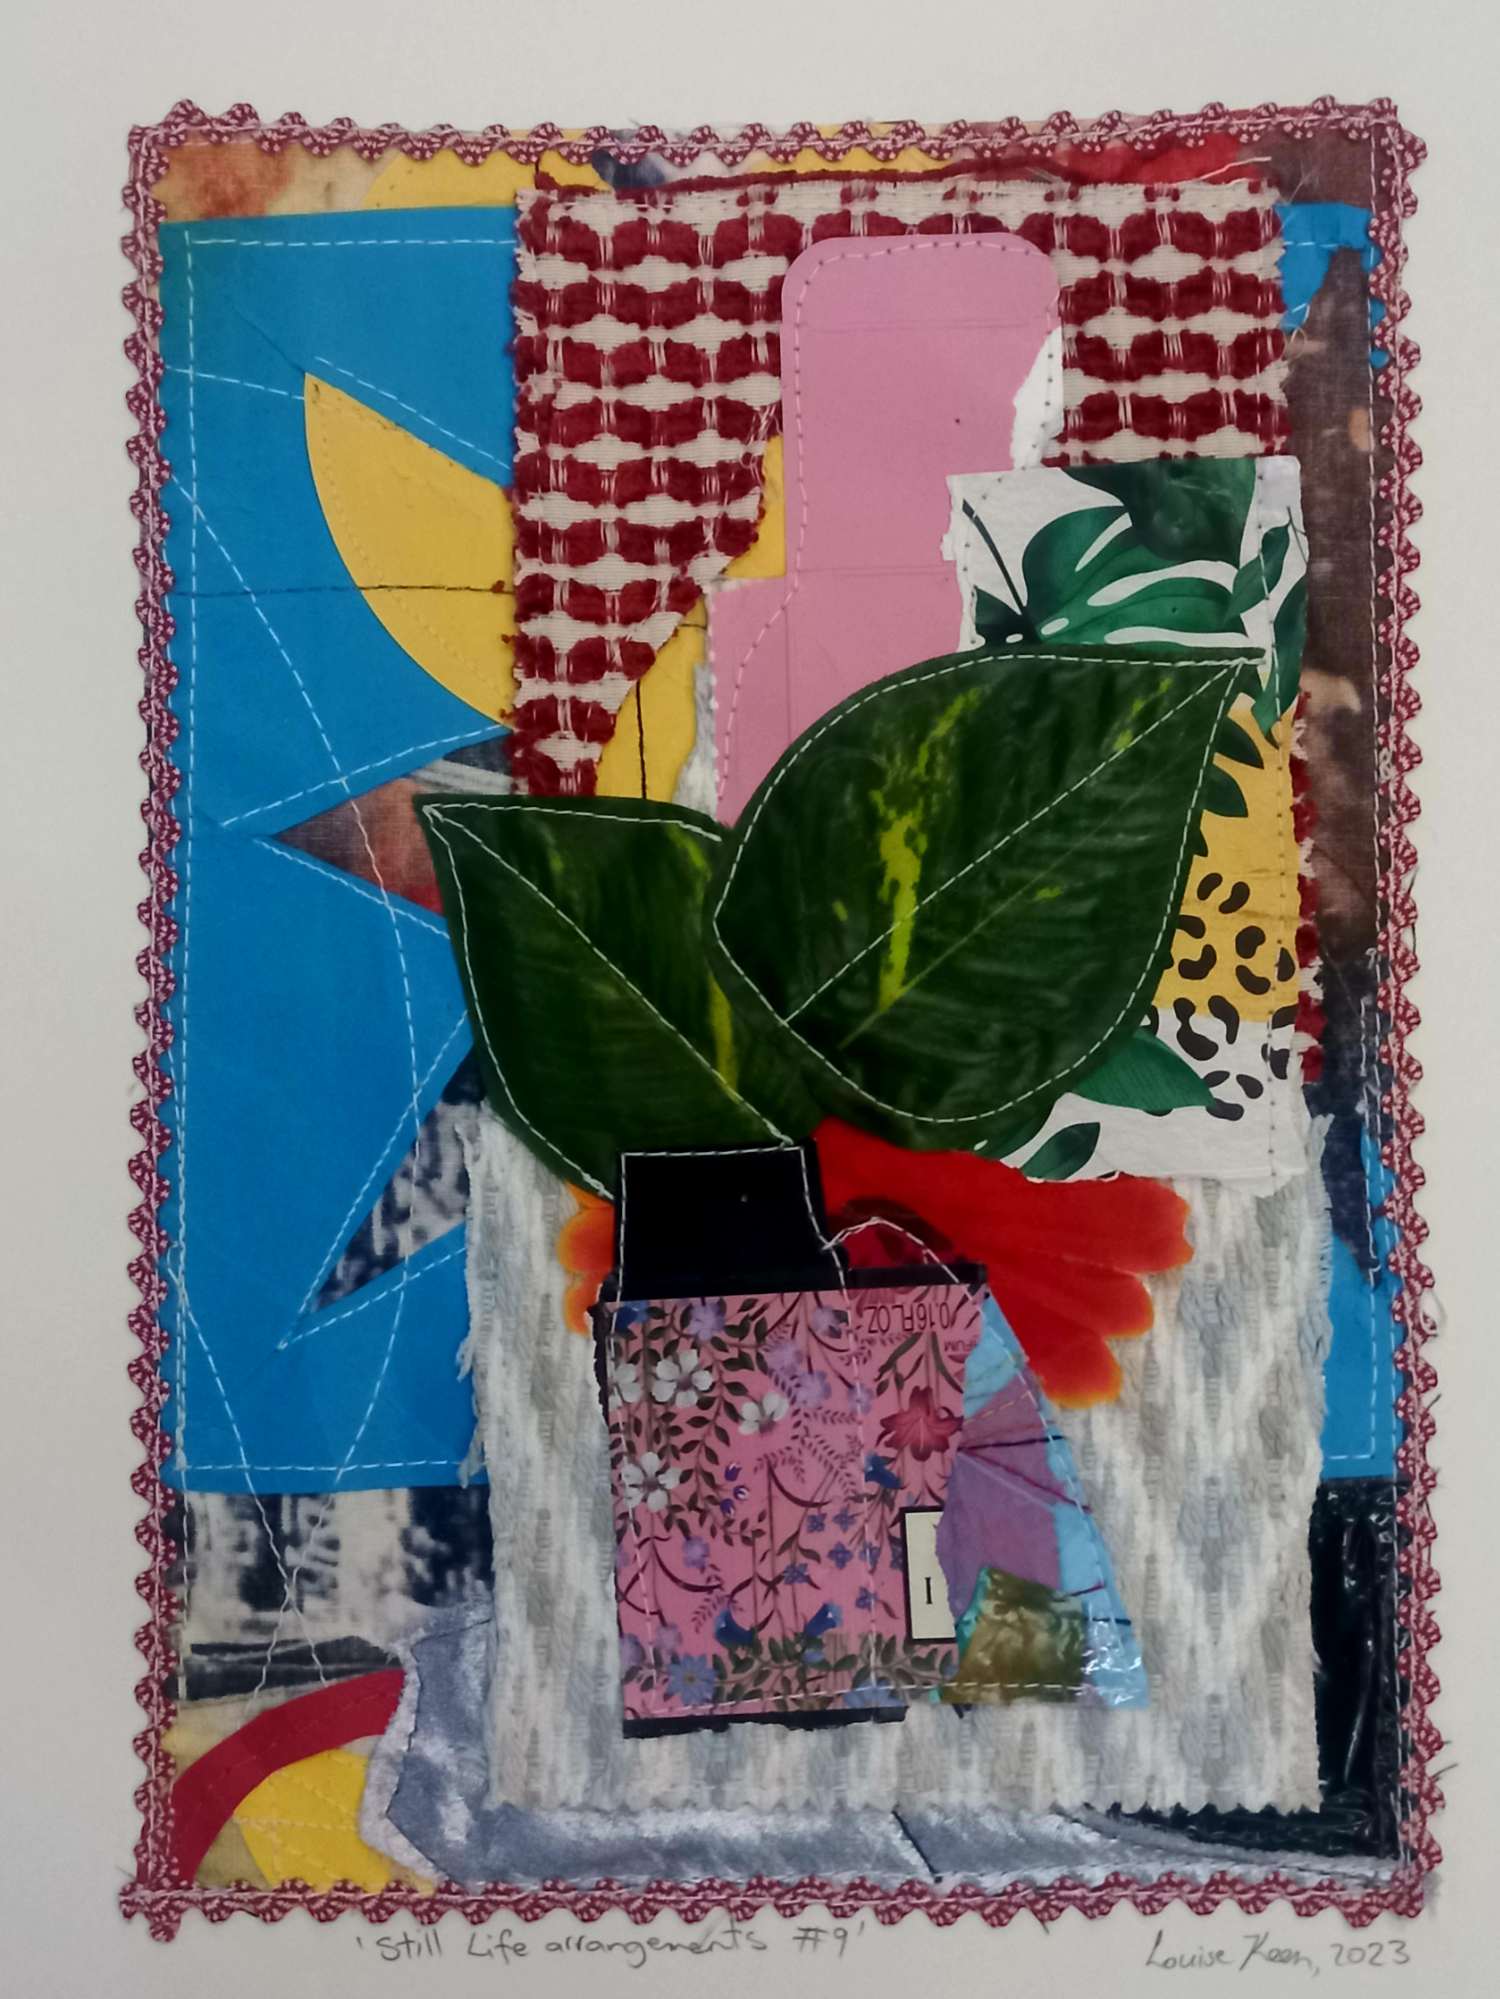 A vibrant and textured mixed media collage combining various fabric patterns, plant elements, and a small floral print perfume bottle on Hahnemühle fine art paper, creating a unique and eclectic Still Life Arrangements #9 by Louise Keen.